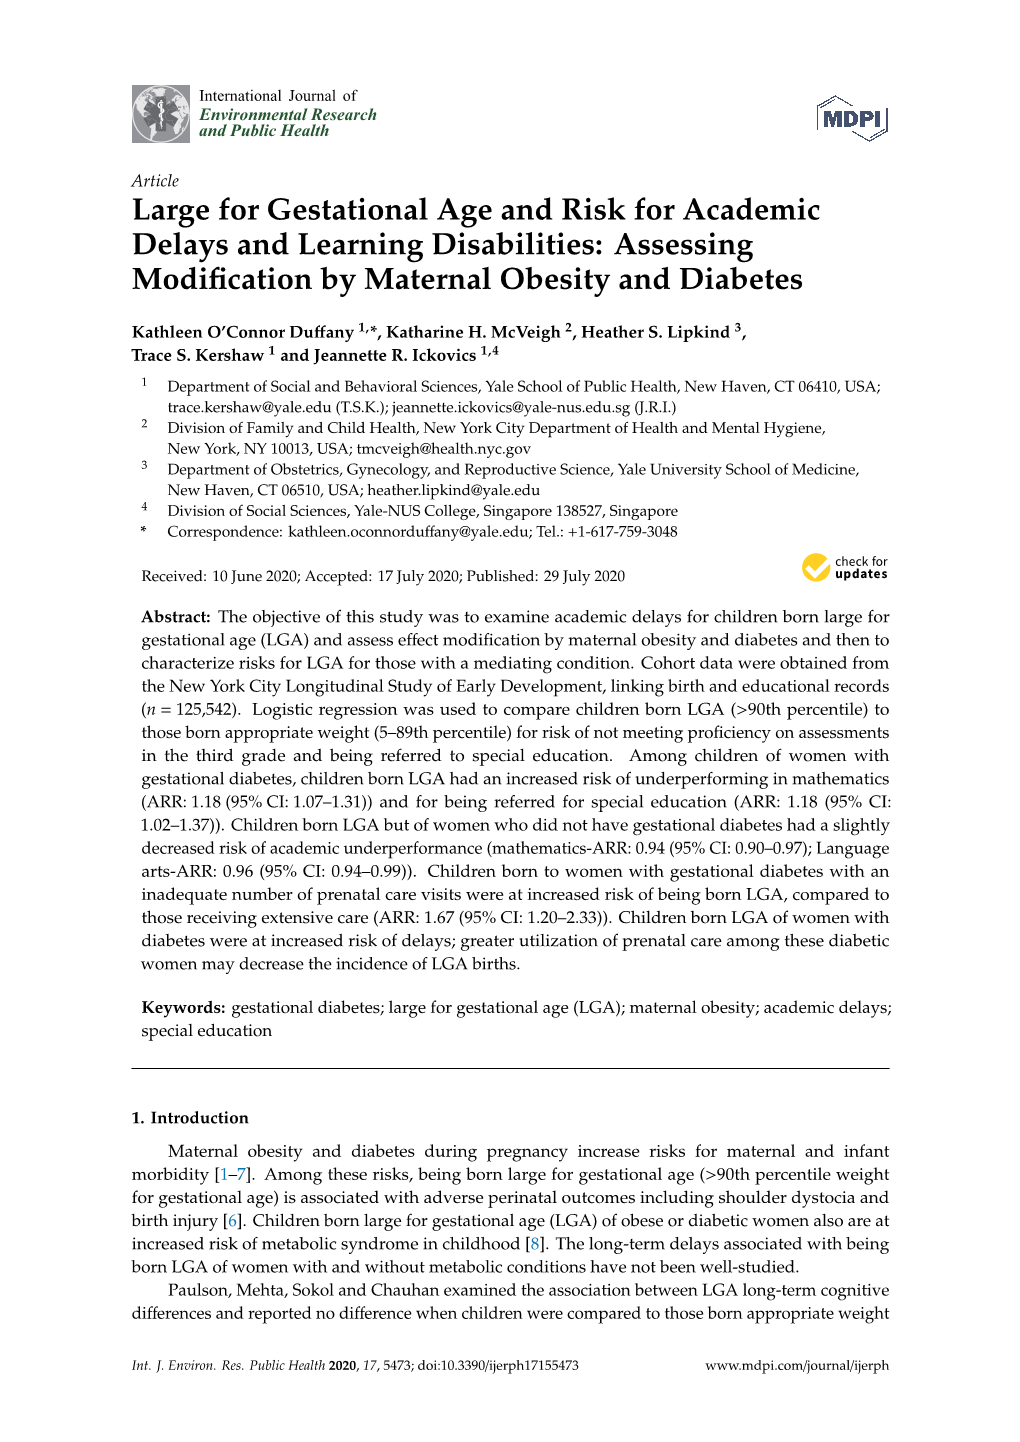 Large for Gestational Age and Risk for Academic Delays and Learning Disabilities: Assessing Modiﬁcation by Maternal Obesity and Diabetes